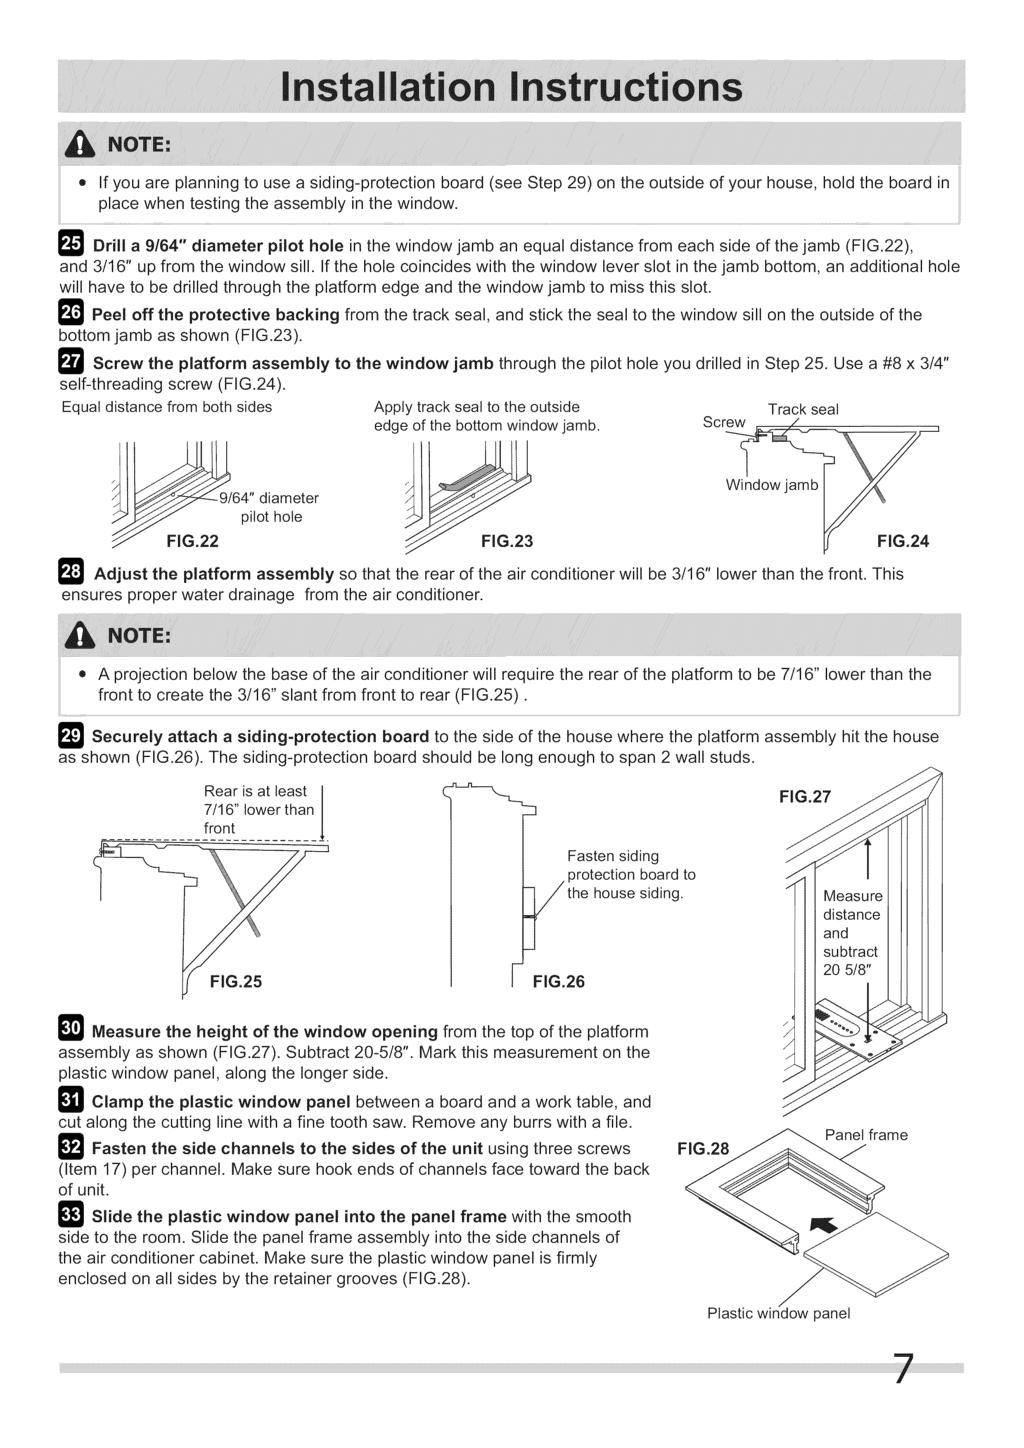 If you are planning to use a siding-protection board (see Step 29) on the outside of your house, hold the board in place when testing the assembly in the window.